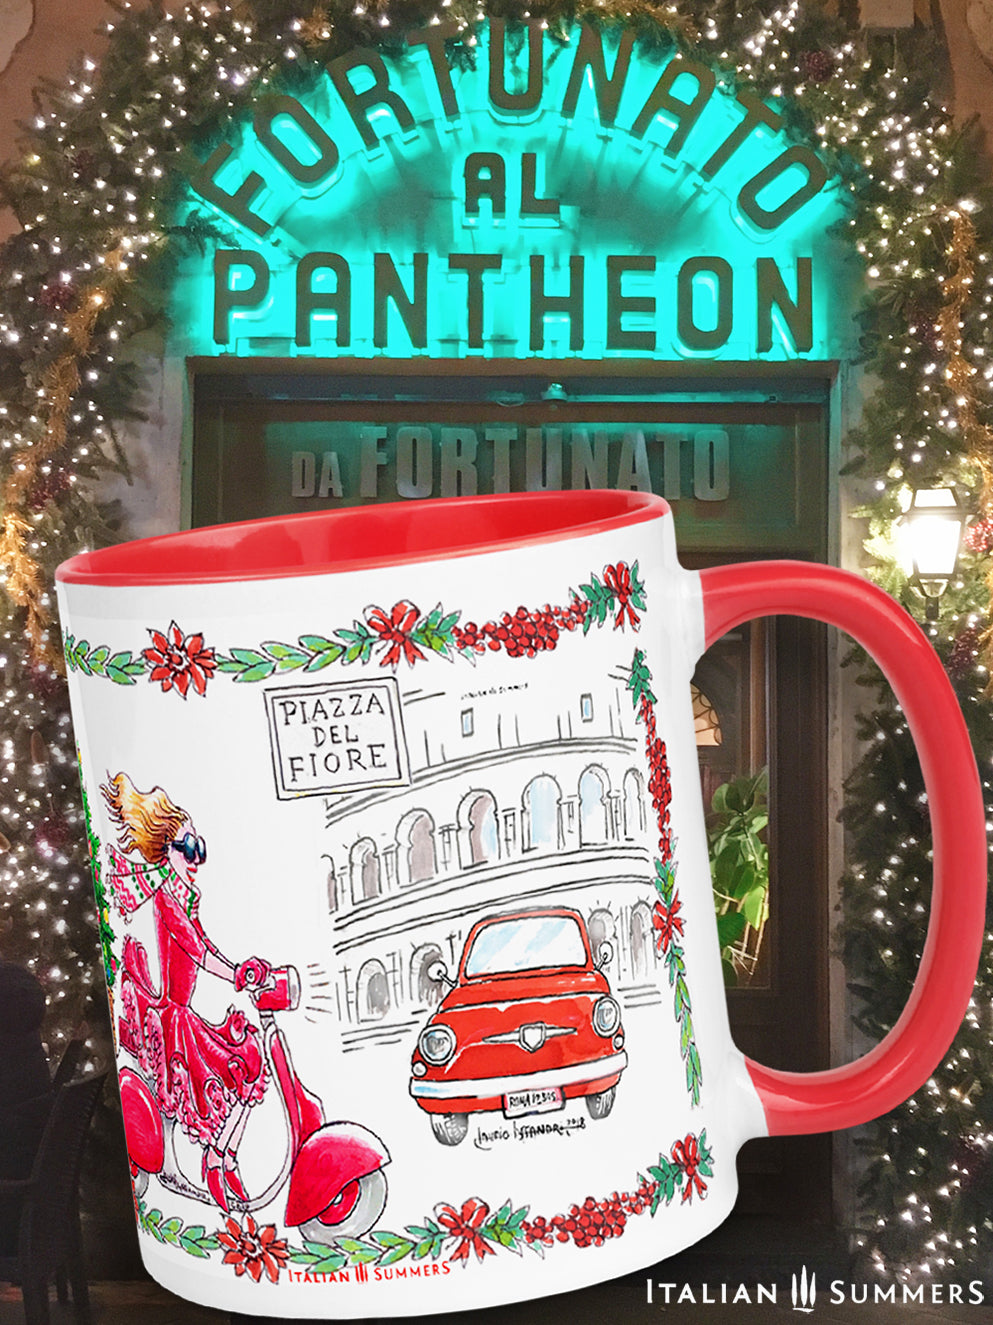 This Christmas mug ROMA is like a magical portal to the Italian holiday tradition! Imagine warmly wrapped in a cozy Italian village, sipping vino while a smiling Italian lady gesticulates towards the Colosseum. With all the features like the Vespa, Italian street sign, and Christmas tree, Buon Natale indeed! Made by Italian Summers Copyright Italian Summers